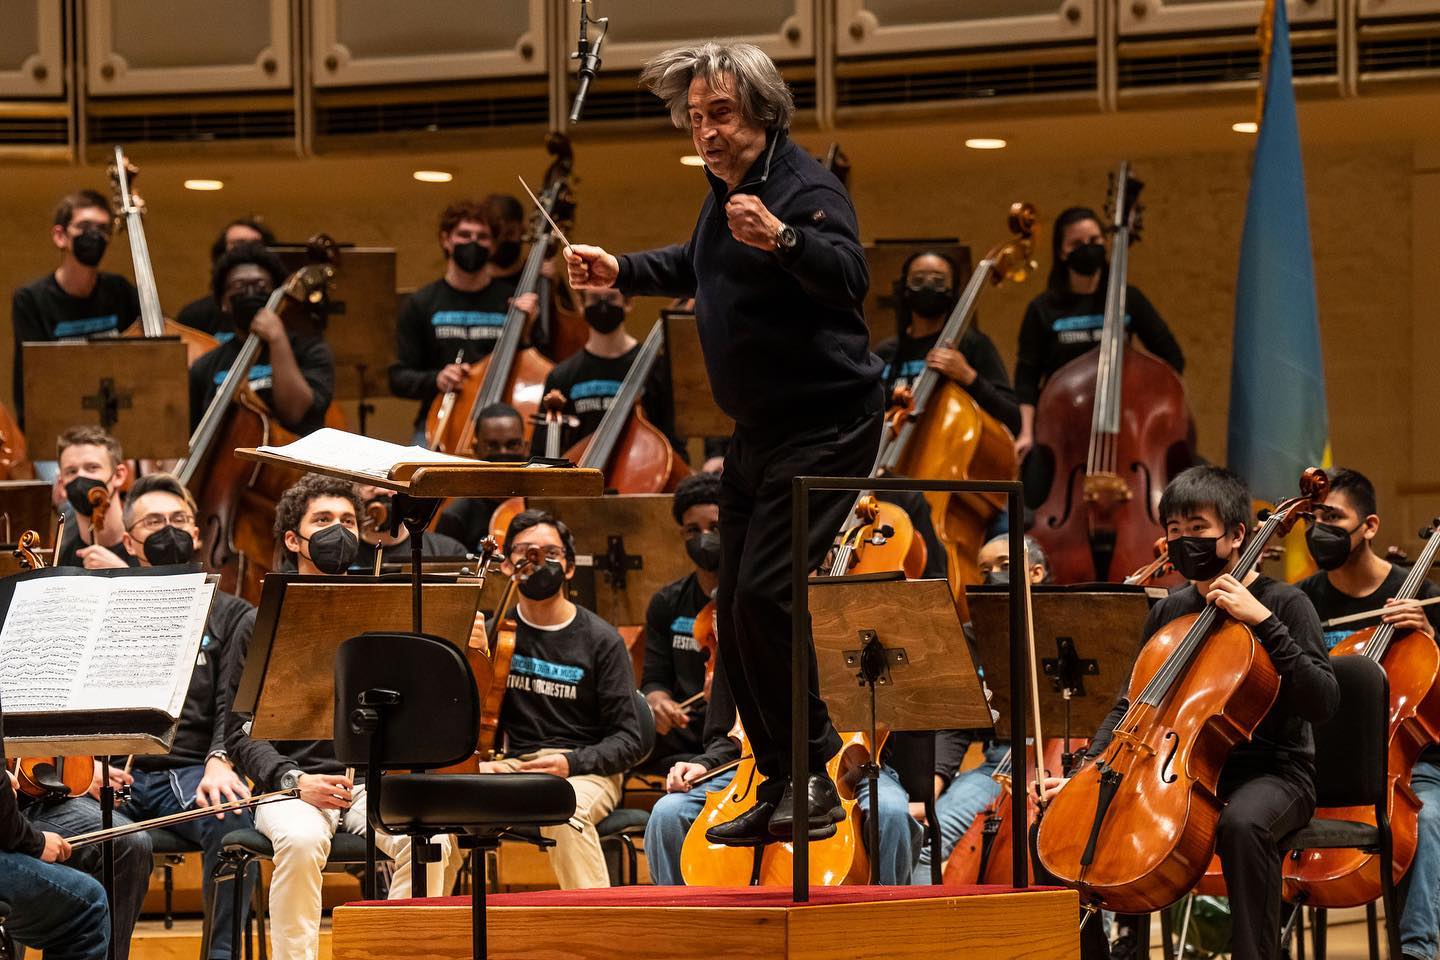 Report: Riccardo Muti, 81, extends with Chicago